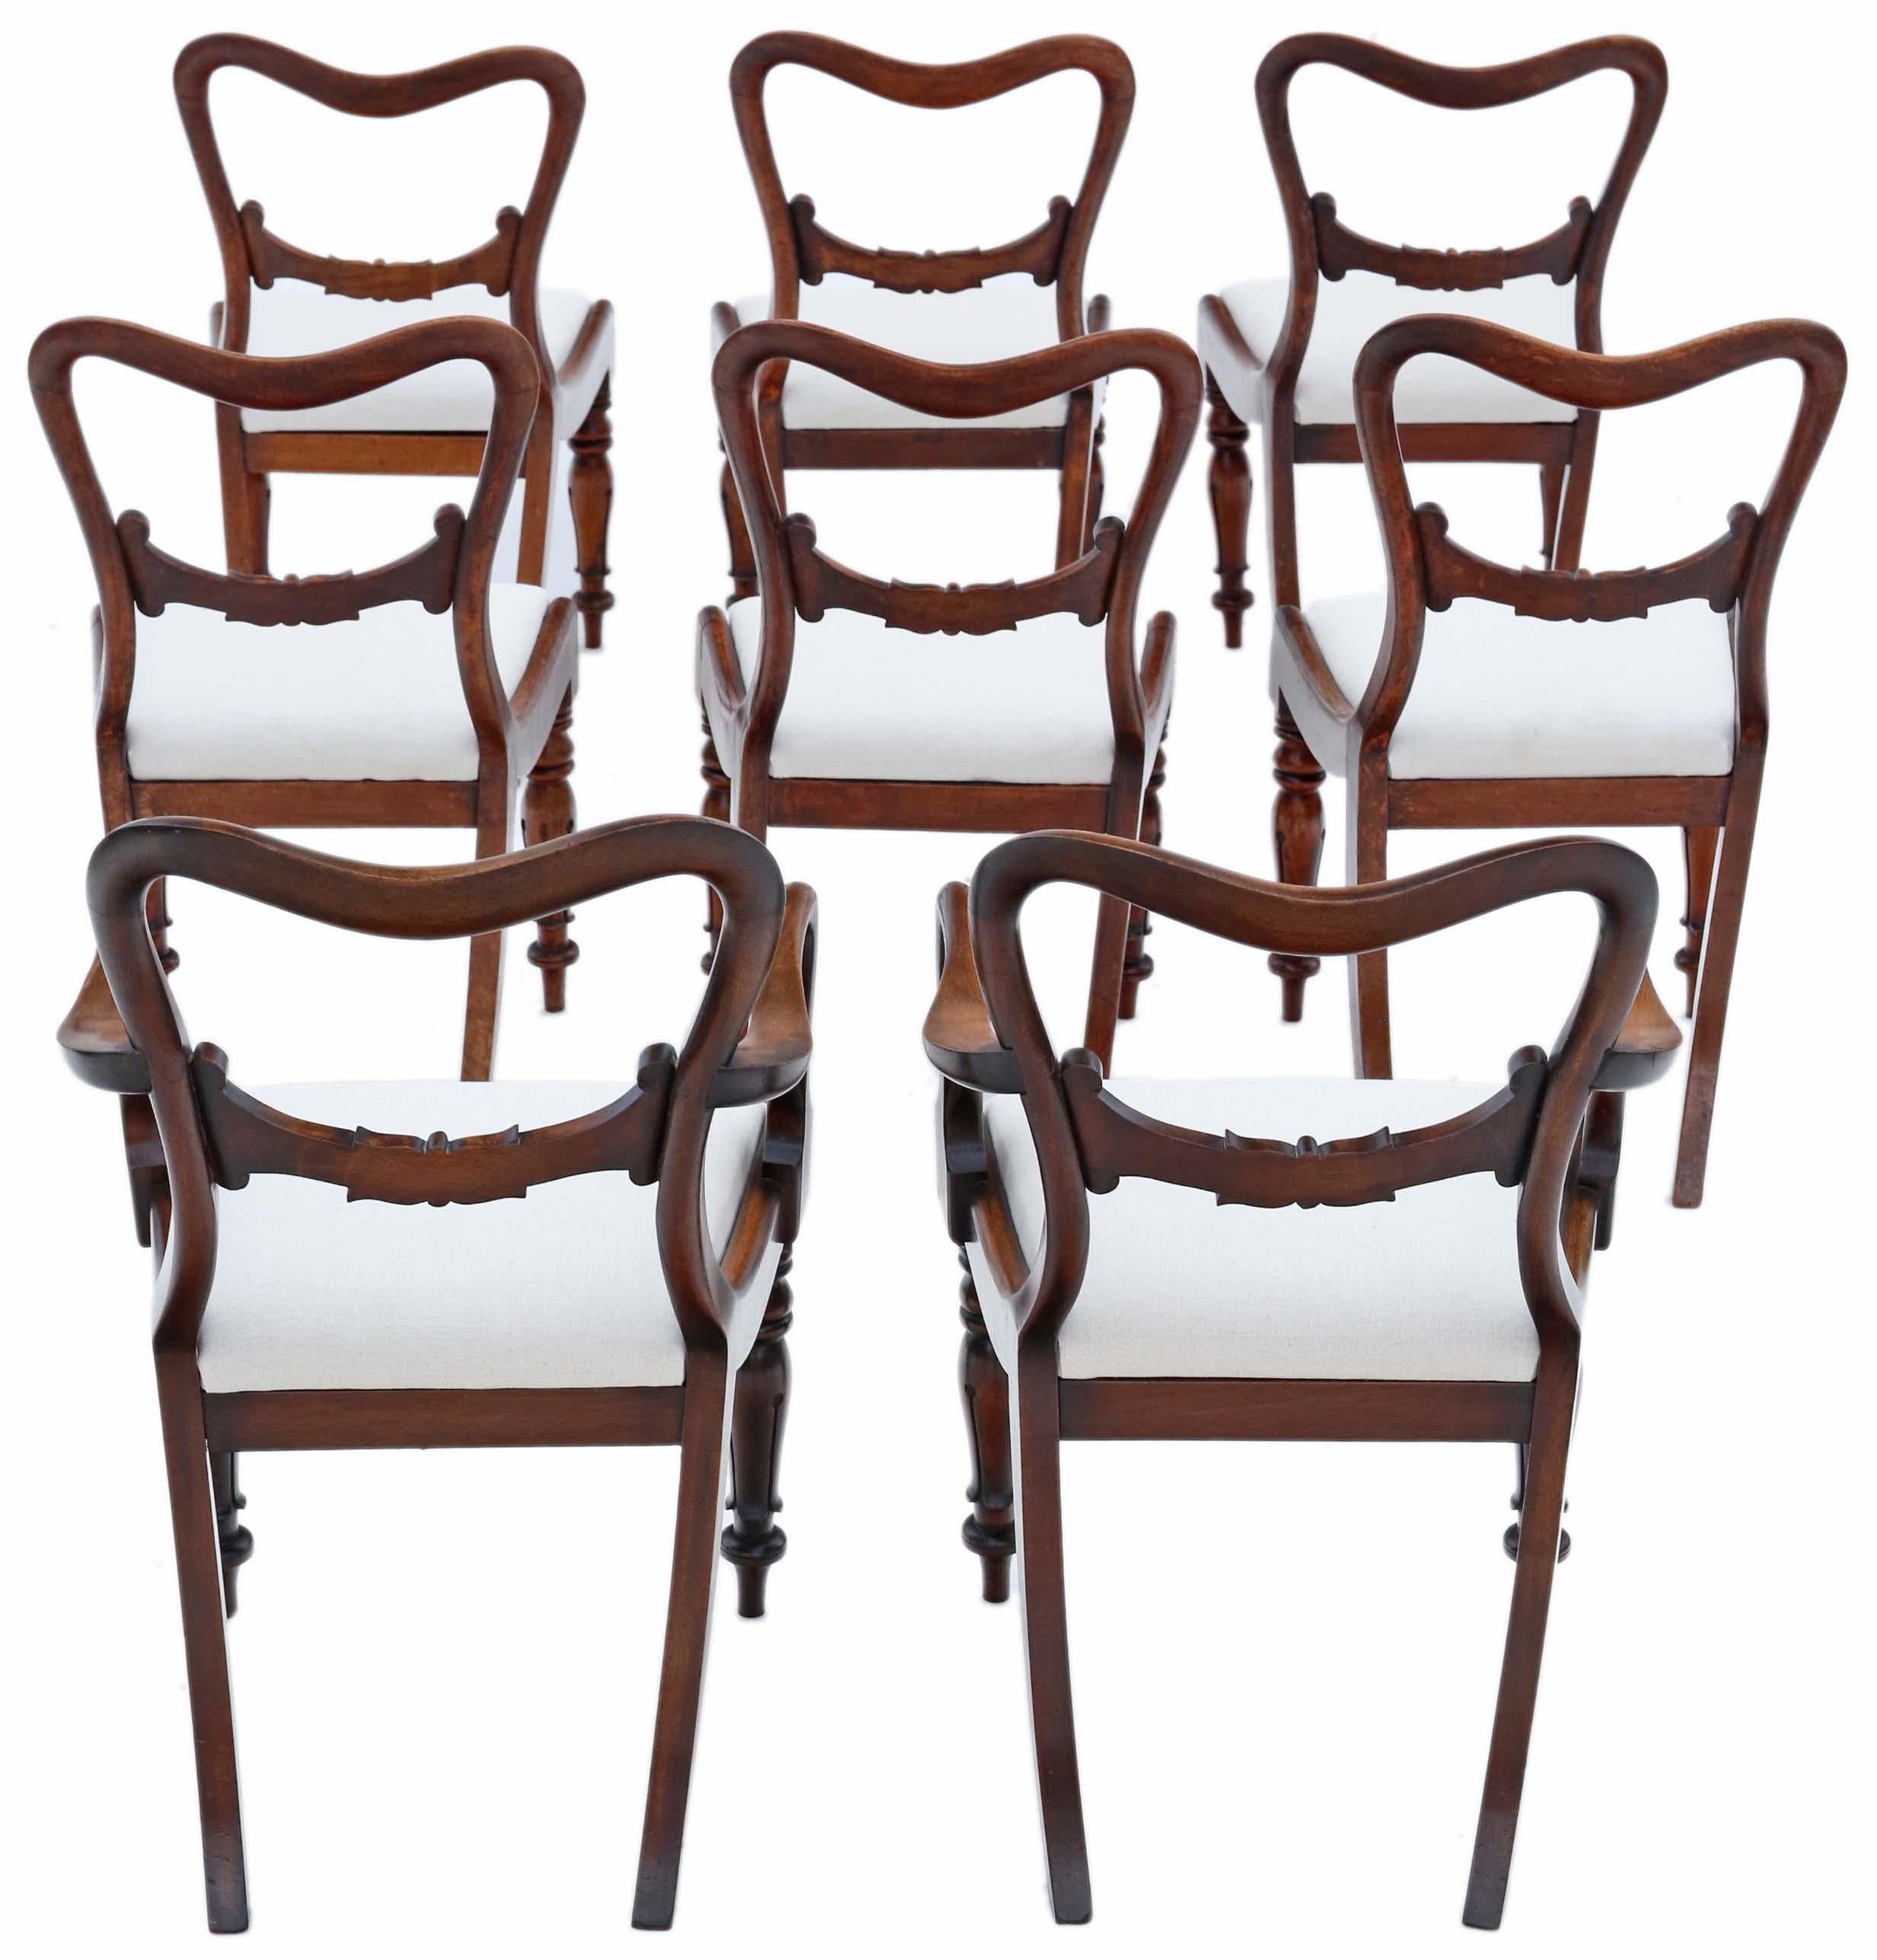 English Antique Fine Quality Set of 8 '6 Plus 2' Balloon Back Mahogany Dining Chairs